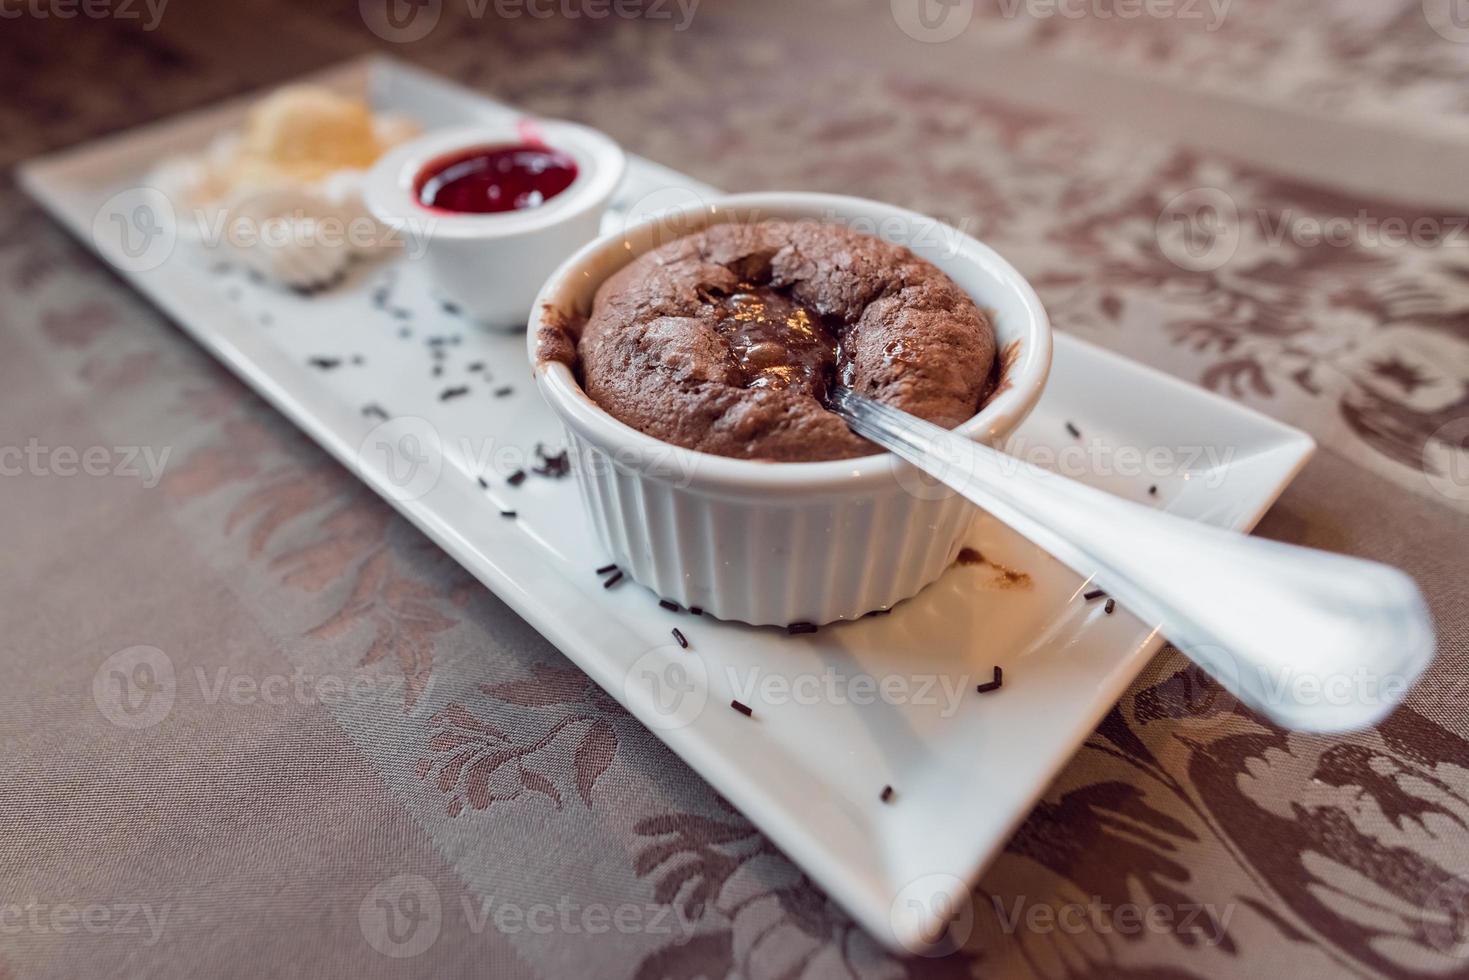 Chocolate souffle with icecream and forest fruit dressing. Concept, restaurant menus, healthy eating, homemade. photo